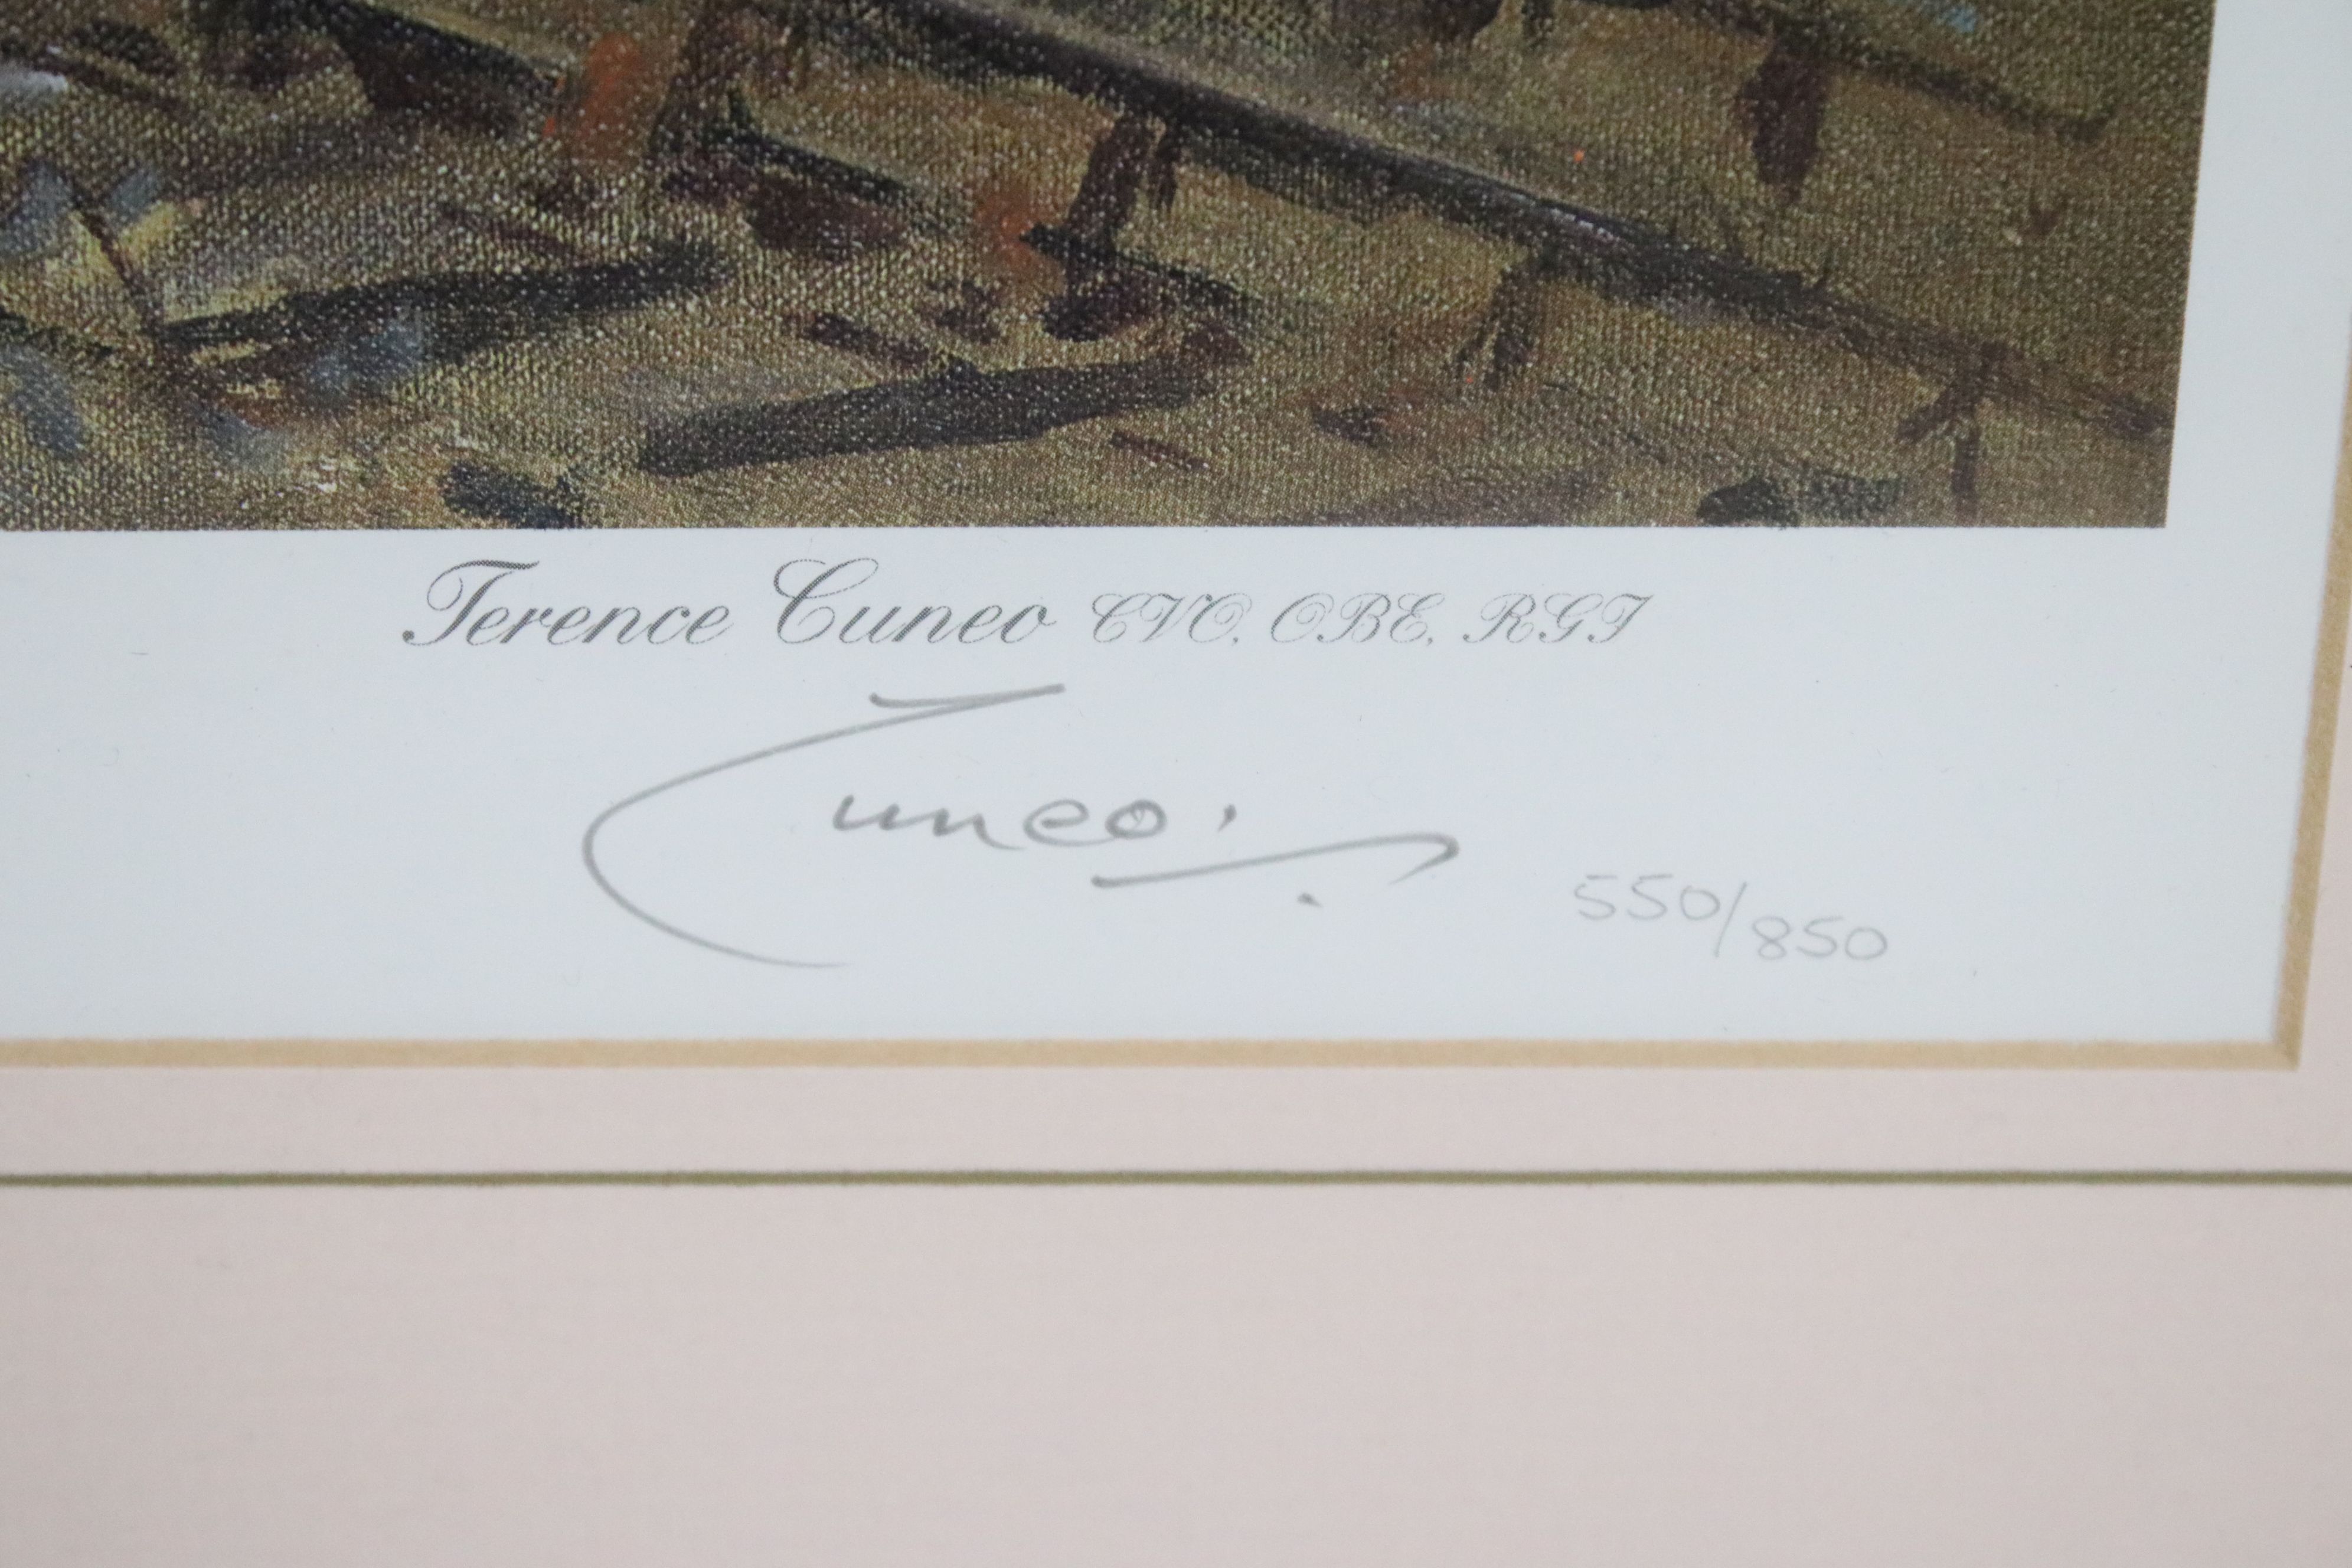 Terence Cuneo, Signed Limited Edition Print ' The Golden Arrow ' no. 550/850, 49cm x 62cm, framed - Image 7 of 8